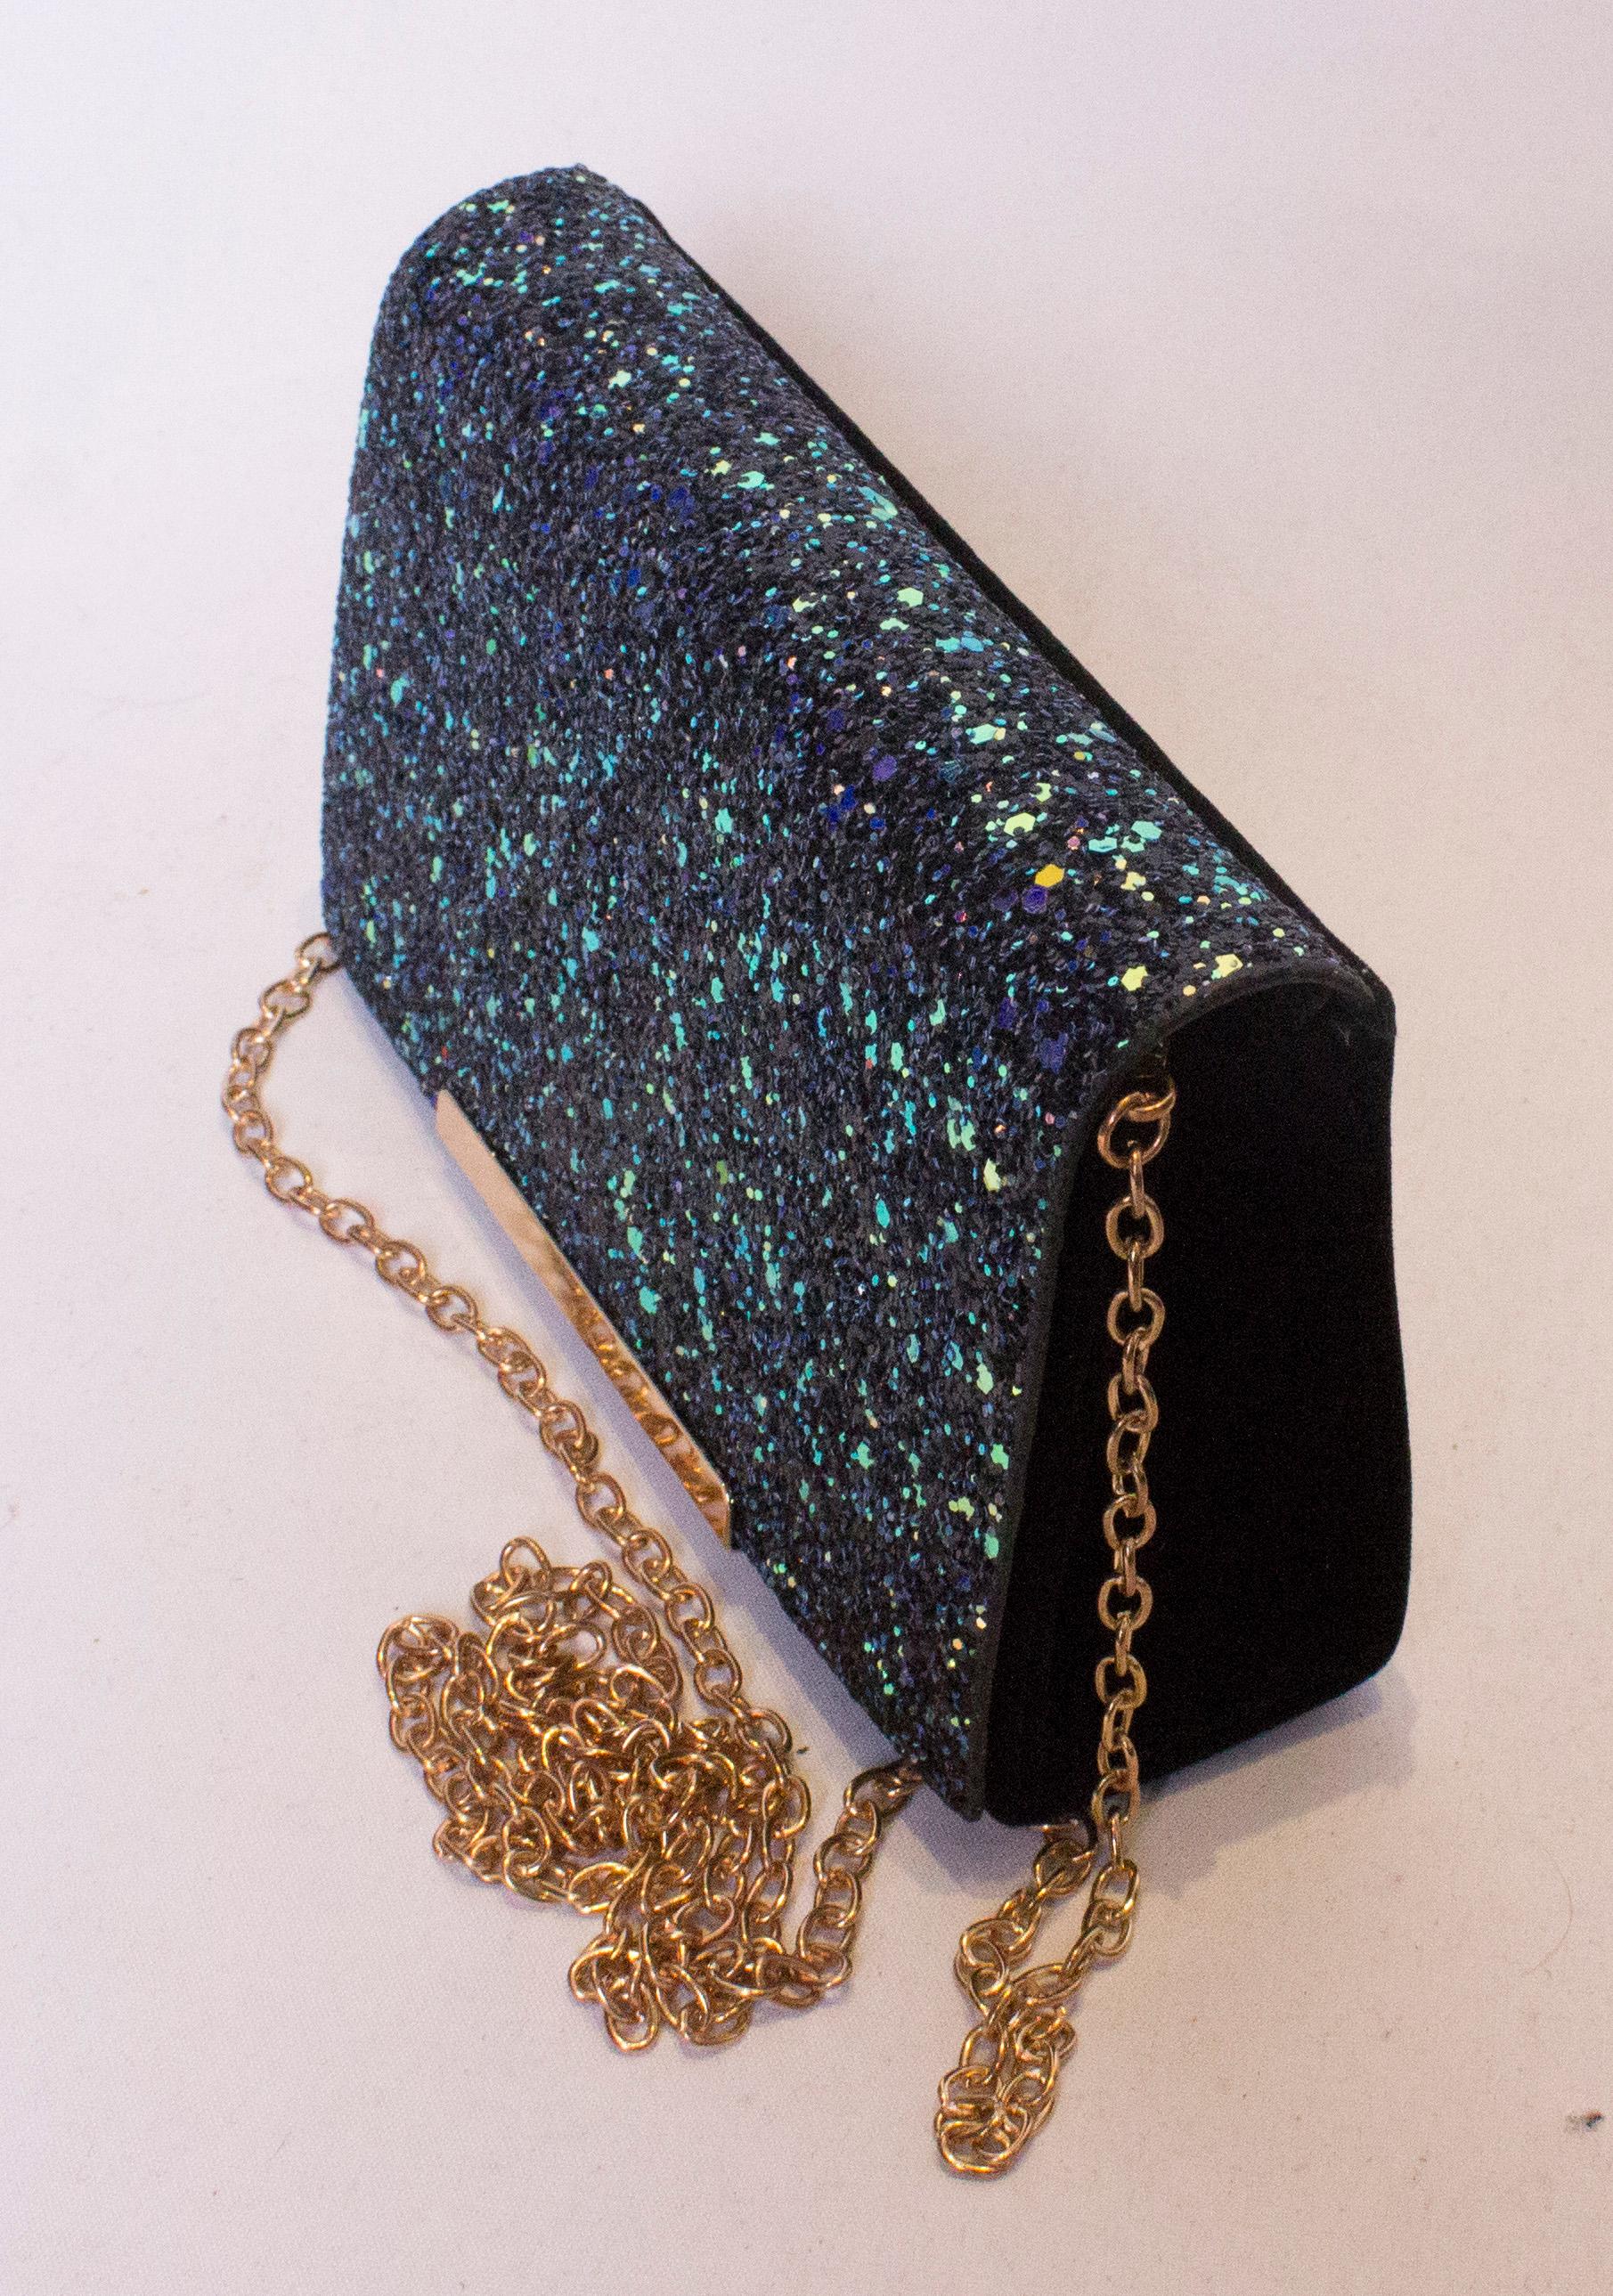 A great bag for the party season. In a pretty mix of blue ,lilac, pink and green. The bag has a flap over front, with a popper fastening . Internally there is one pouch pocket and a detachable gold chain , so the it can be worn as a clutch or a